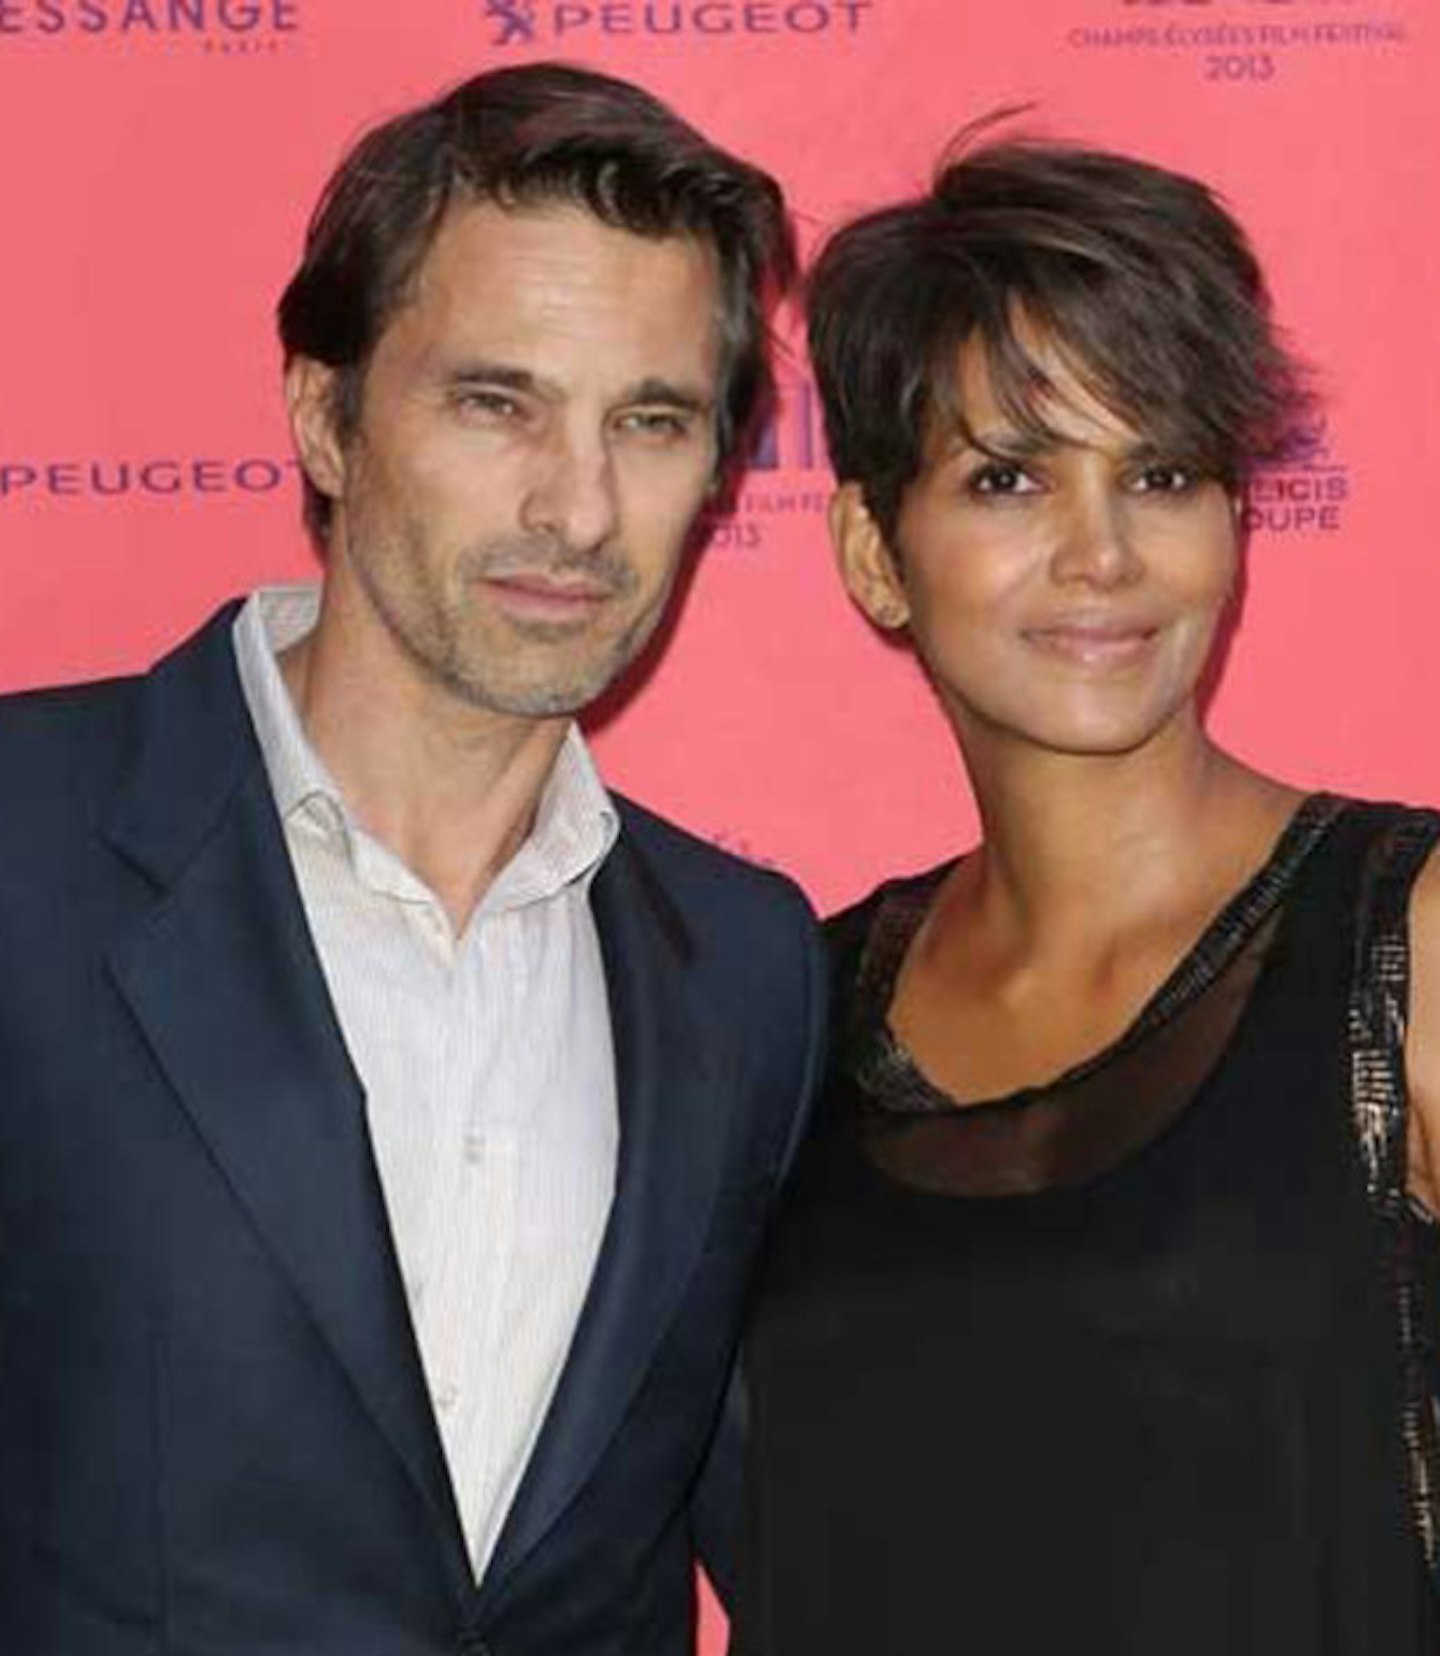 October 2013: Halle Berry welcomed son Maceo